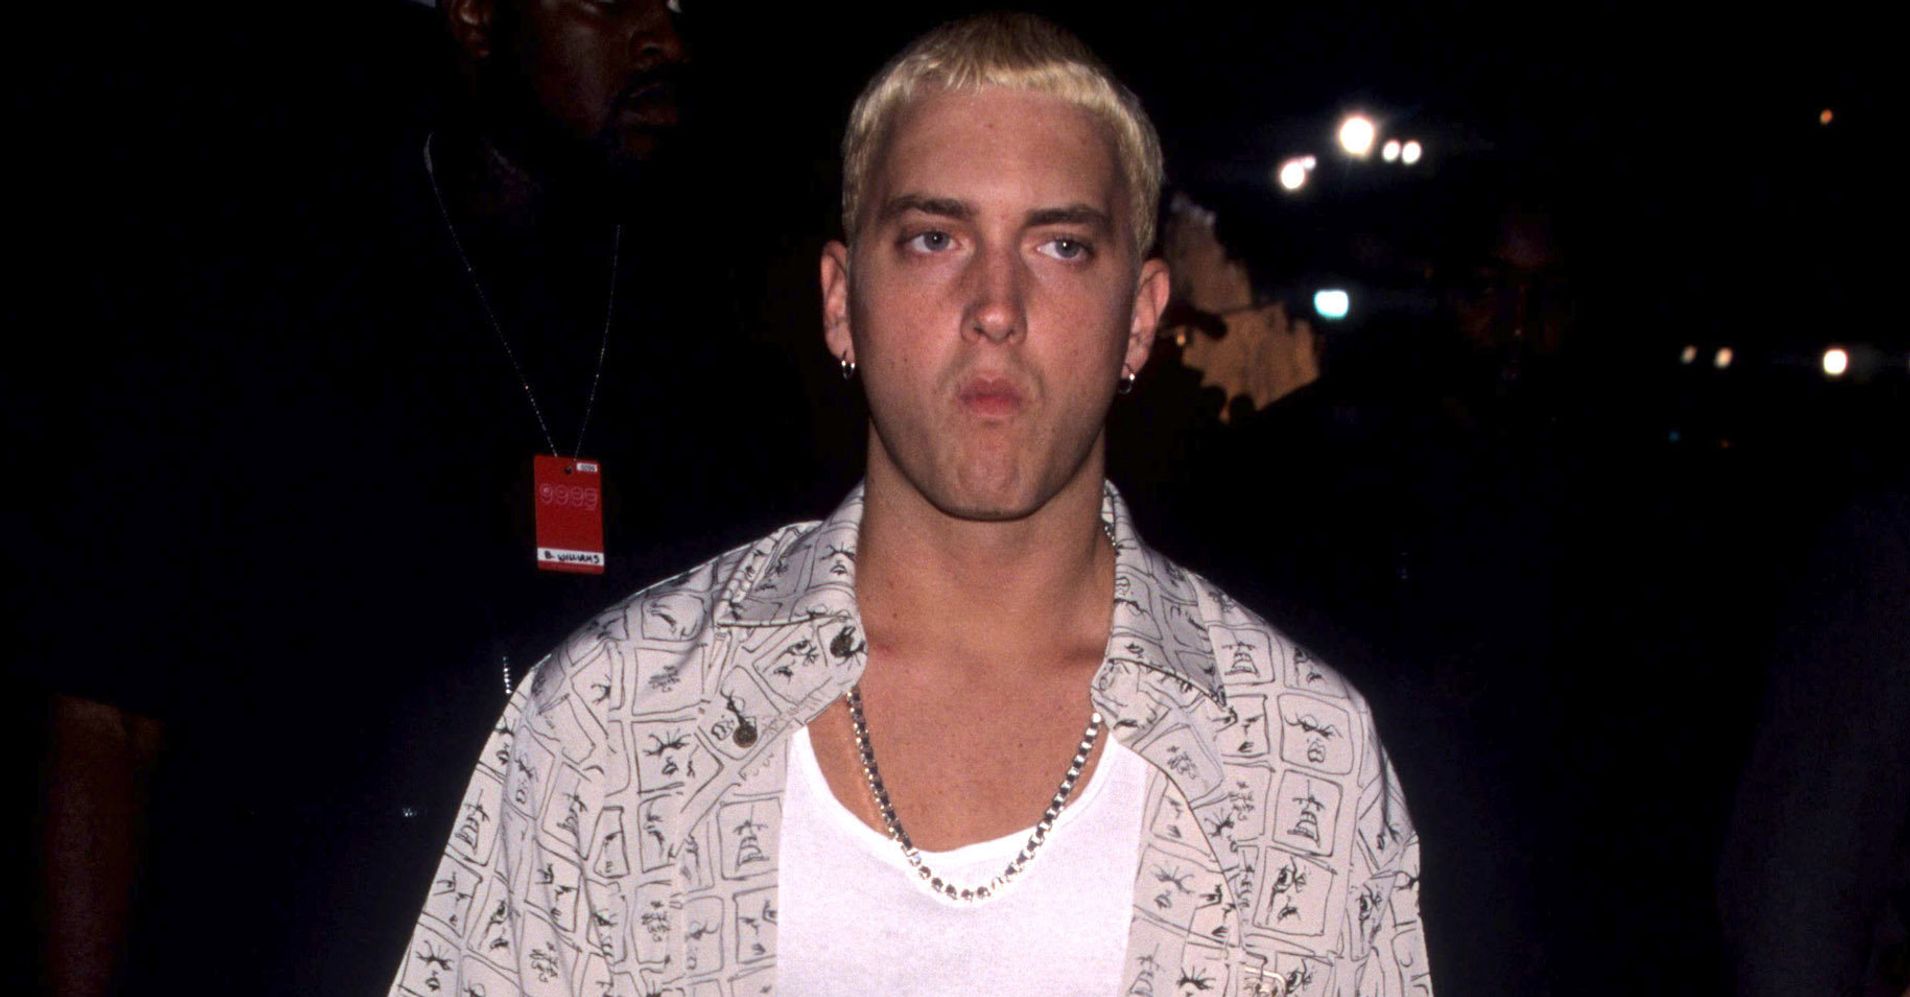 A Look Back At Eminem #39 s Image Over The Years HuffPost